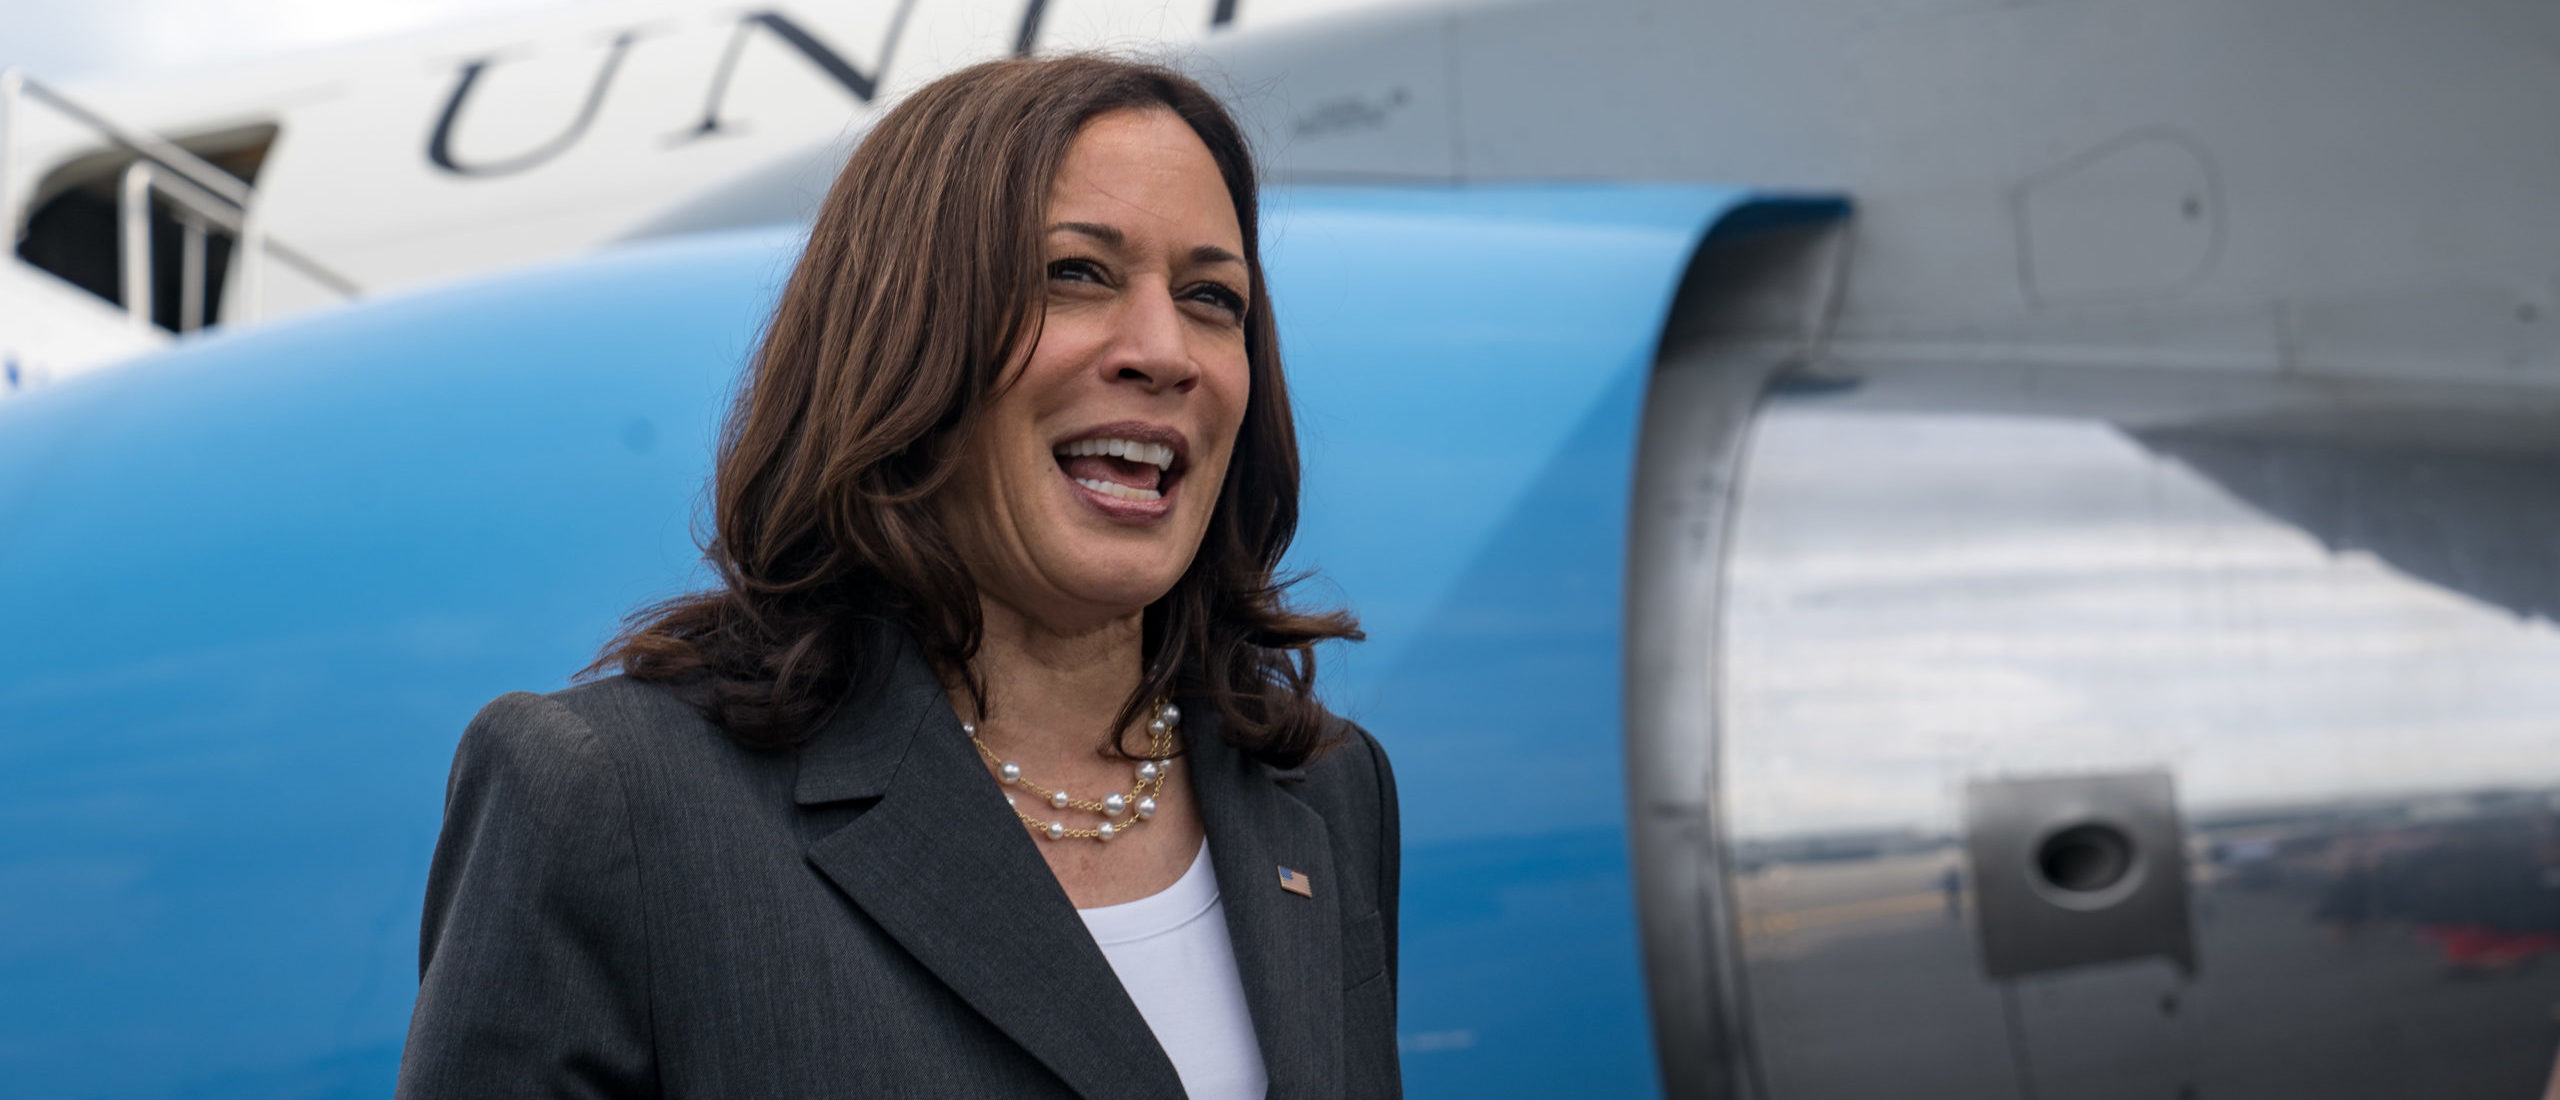 ATLANTA, GA - JUNE 18: U.S. Vice President Kamala Harris speaks with the media at Hartsfield Jackson International Airport before boarding Air Force Two back to Washington DC on June 18, 2021 in Atlanta, Georgia. Vice President Harris is visiting Atlanta as part of a nationwide tour to encourage Americans to get vaccinated. (Photo by Megan Varner/Getty Images)